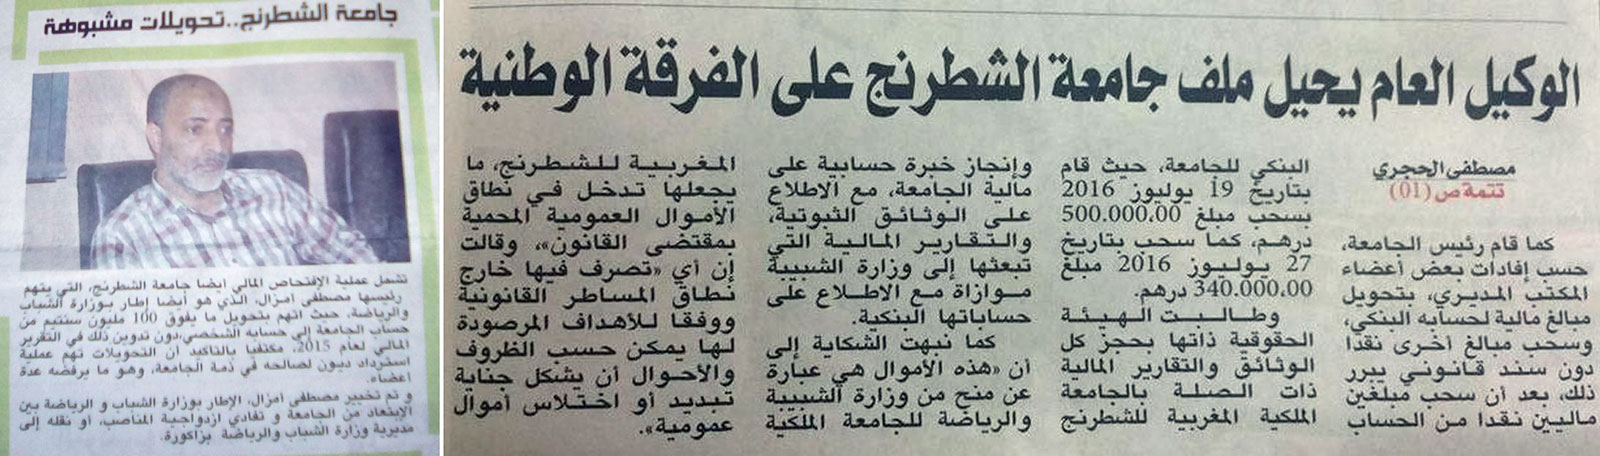 Press clippings from 'Almassa' and 'Assabah'